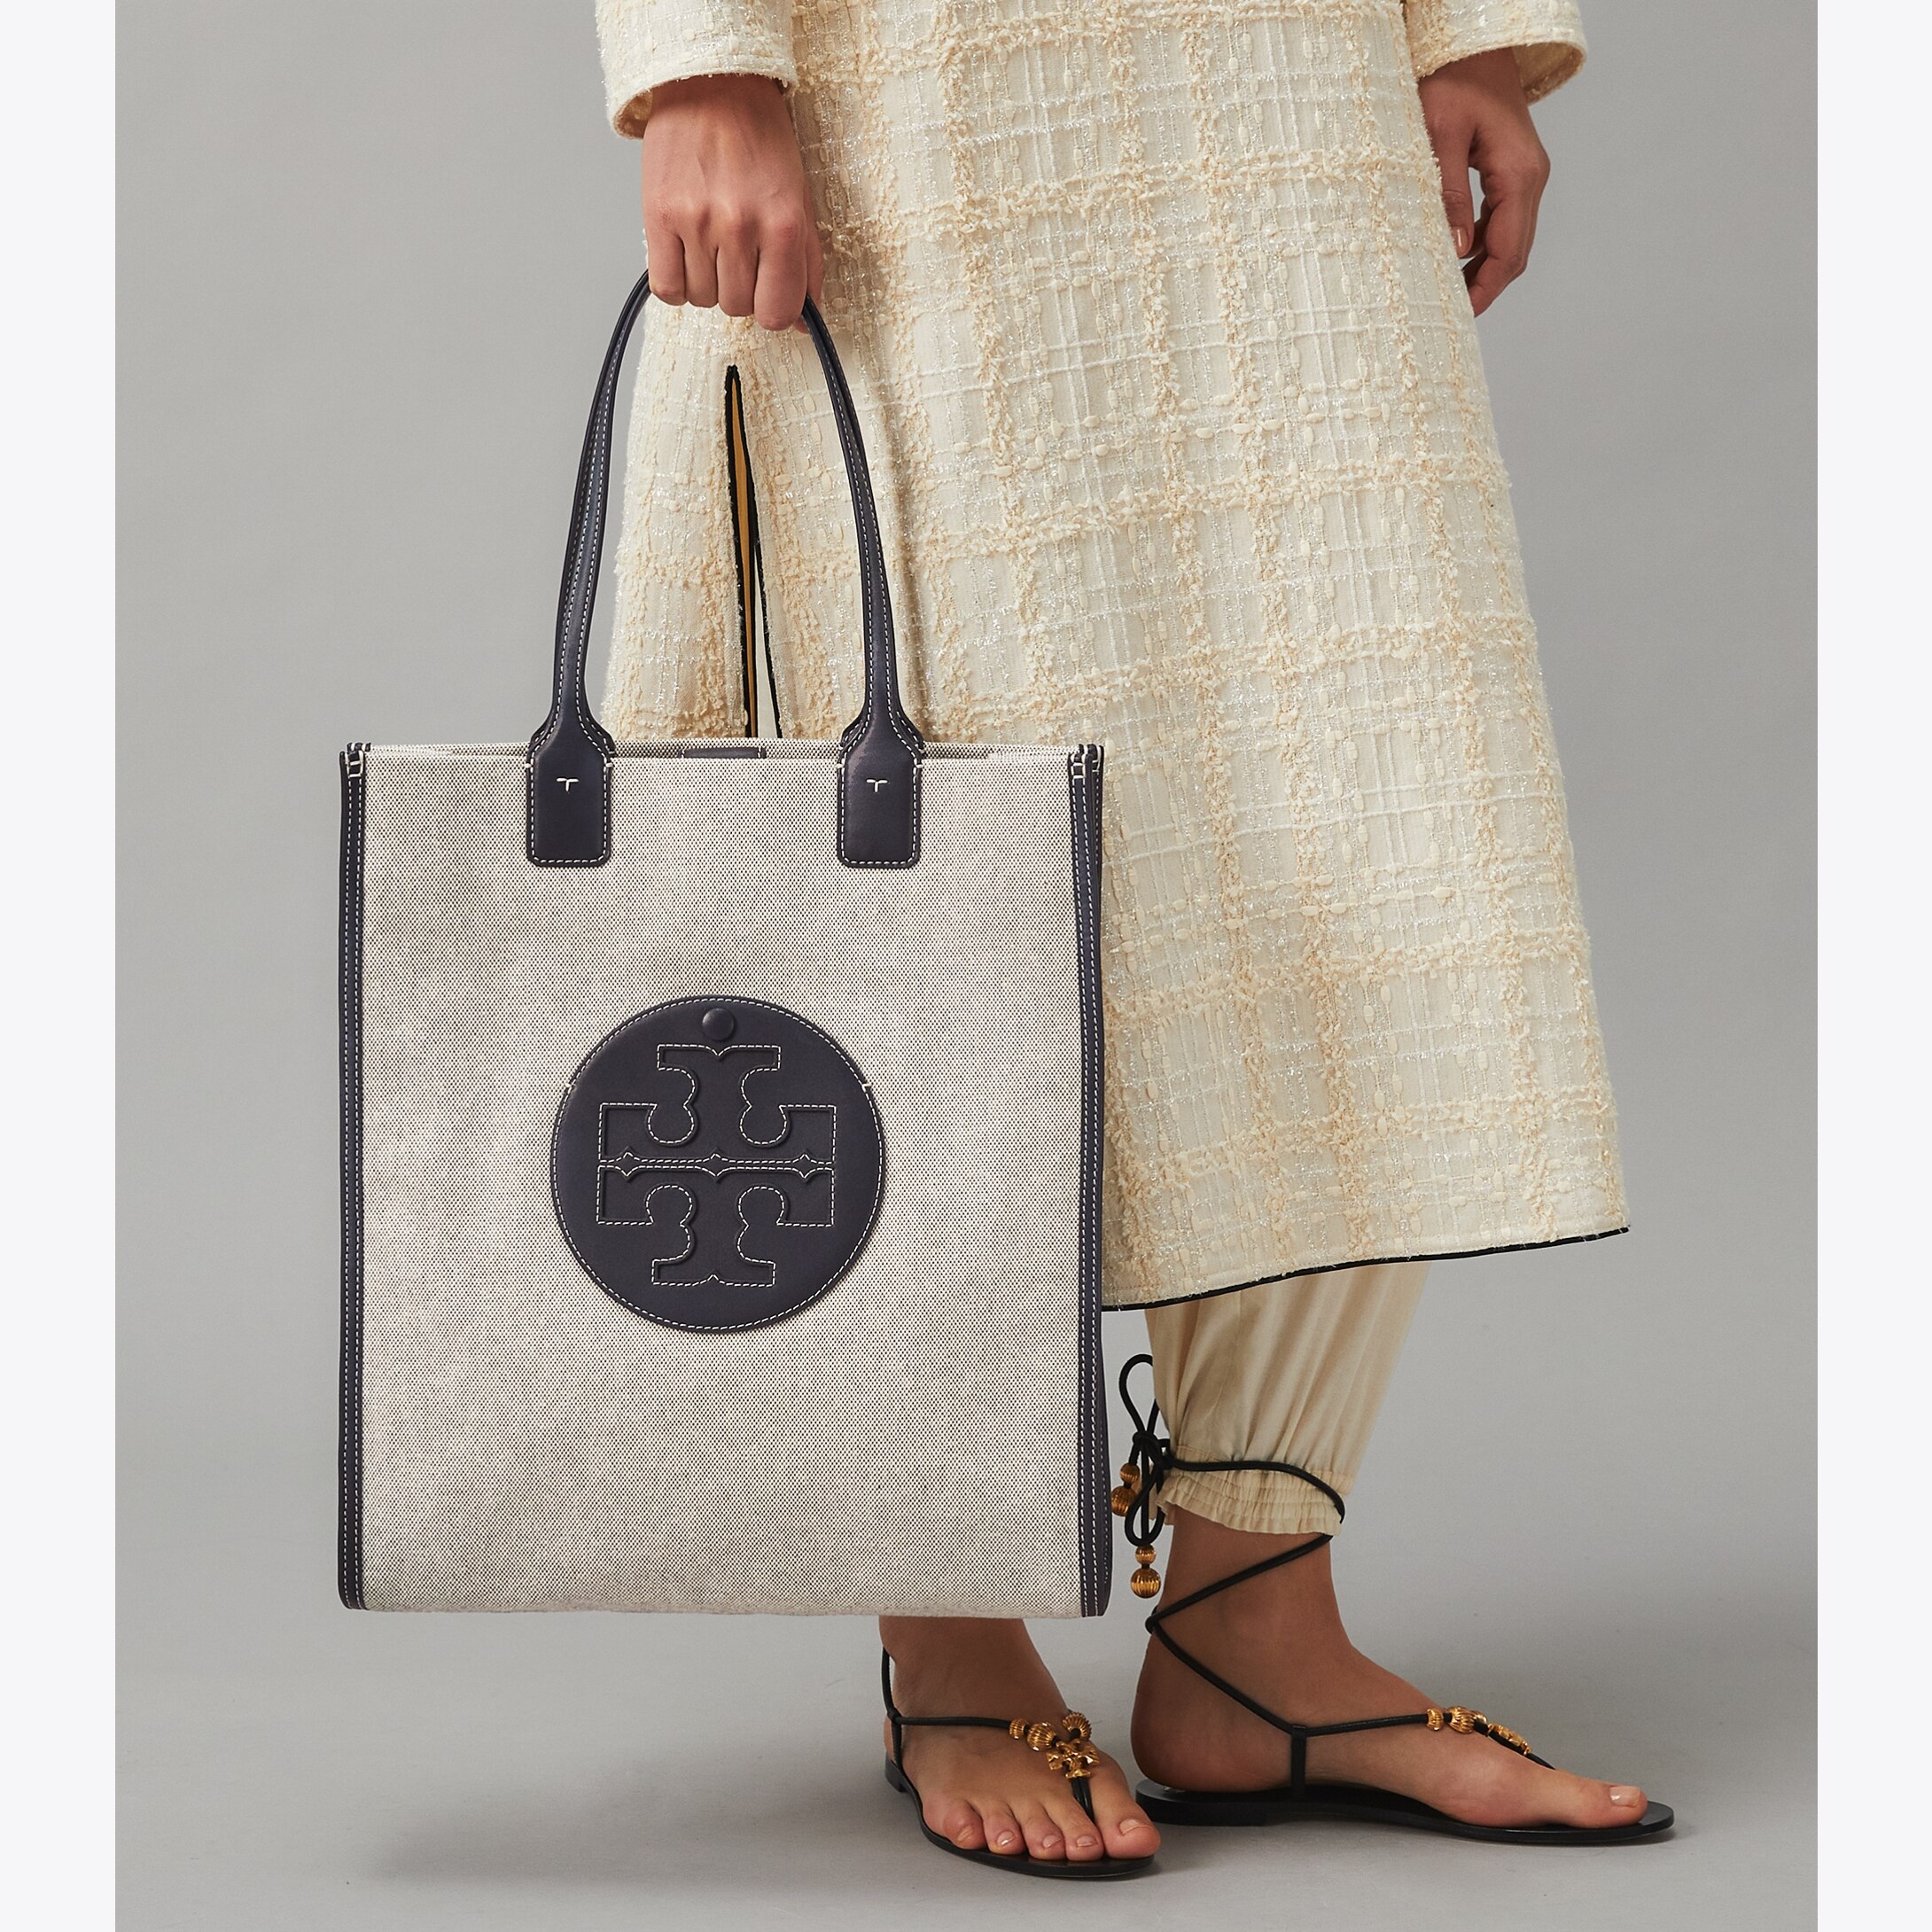 Tory Burch Natural & Tan Ella Canvas Tote, Best Price and Reviews